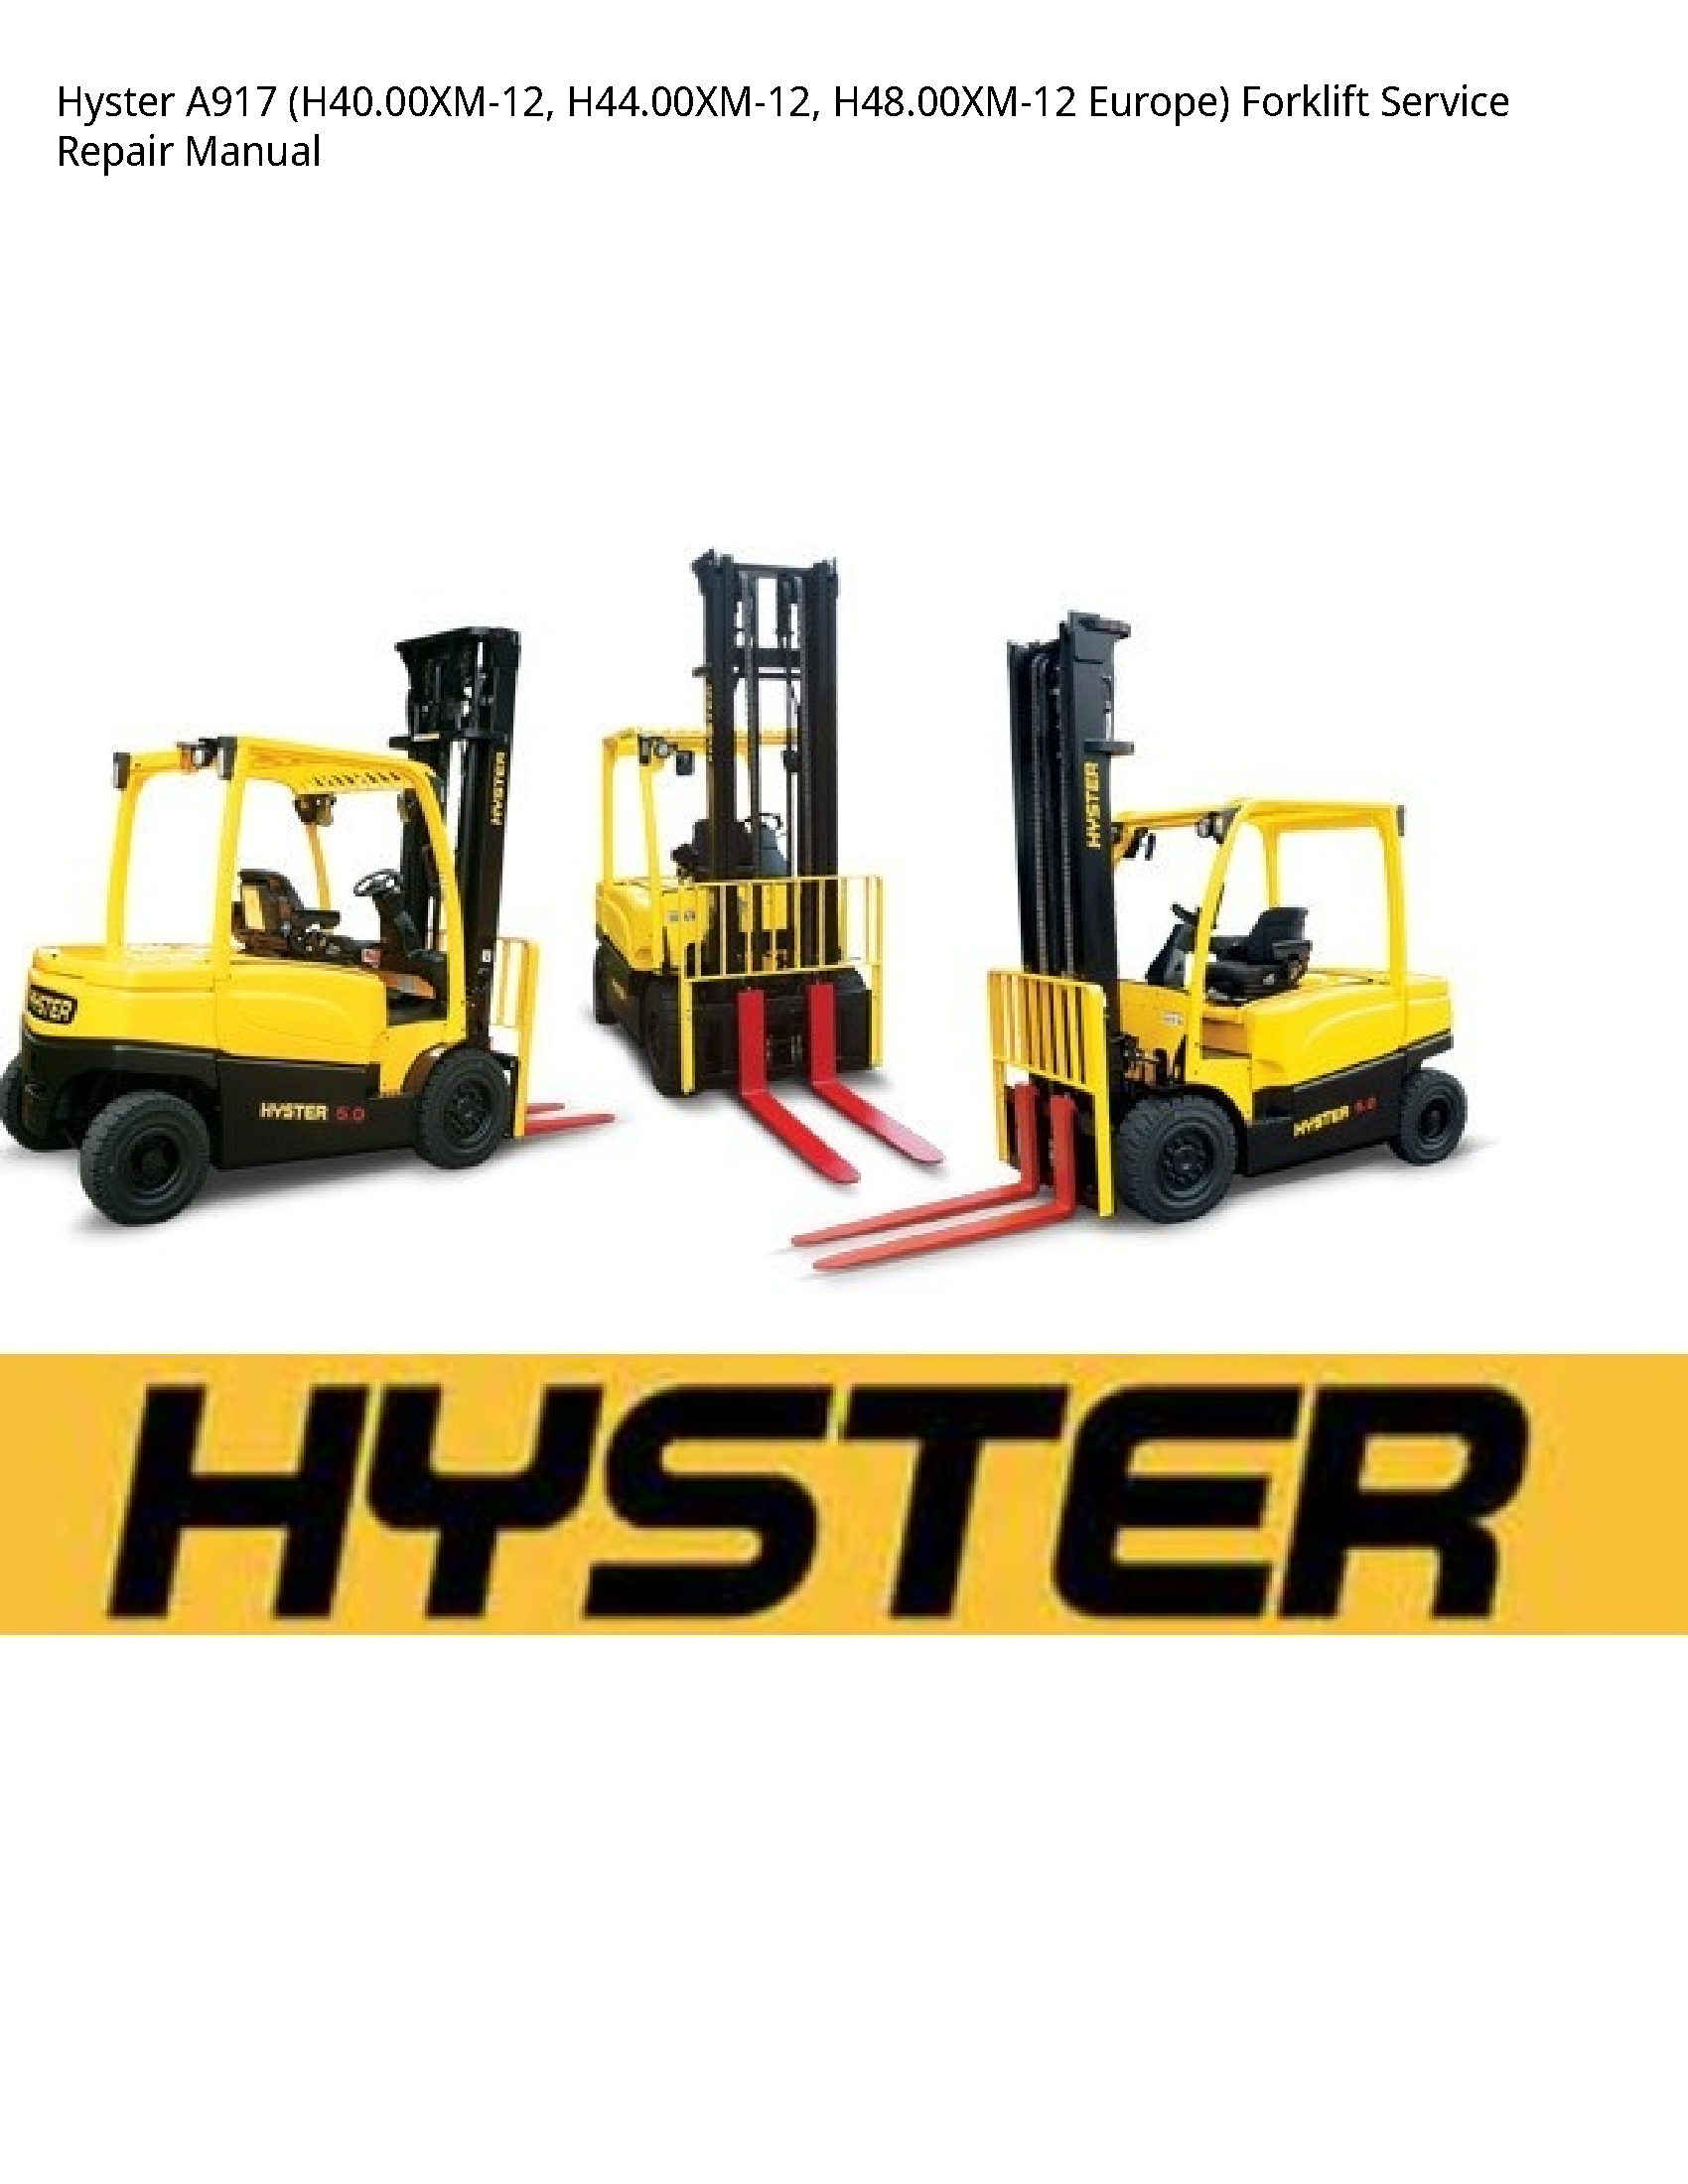 Hyster A917 Europe) Forklift manual